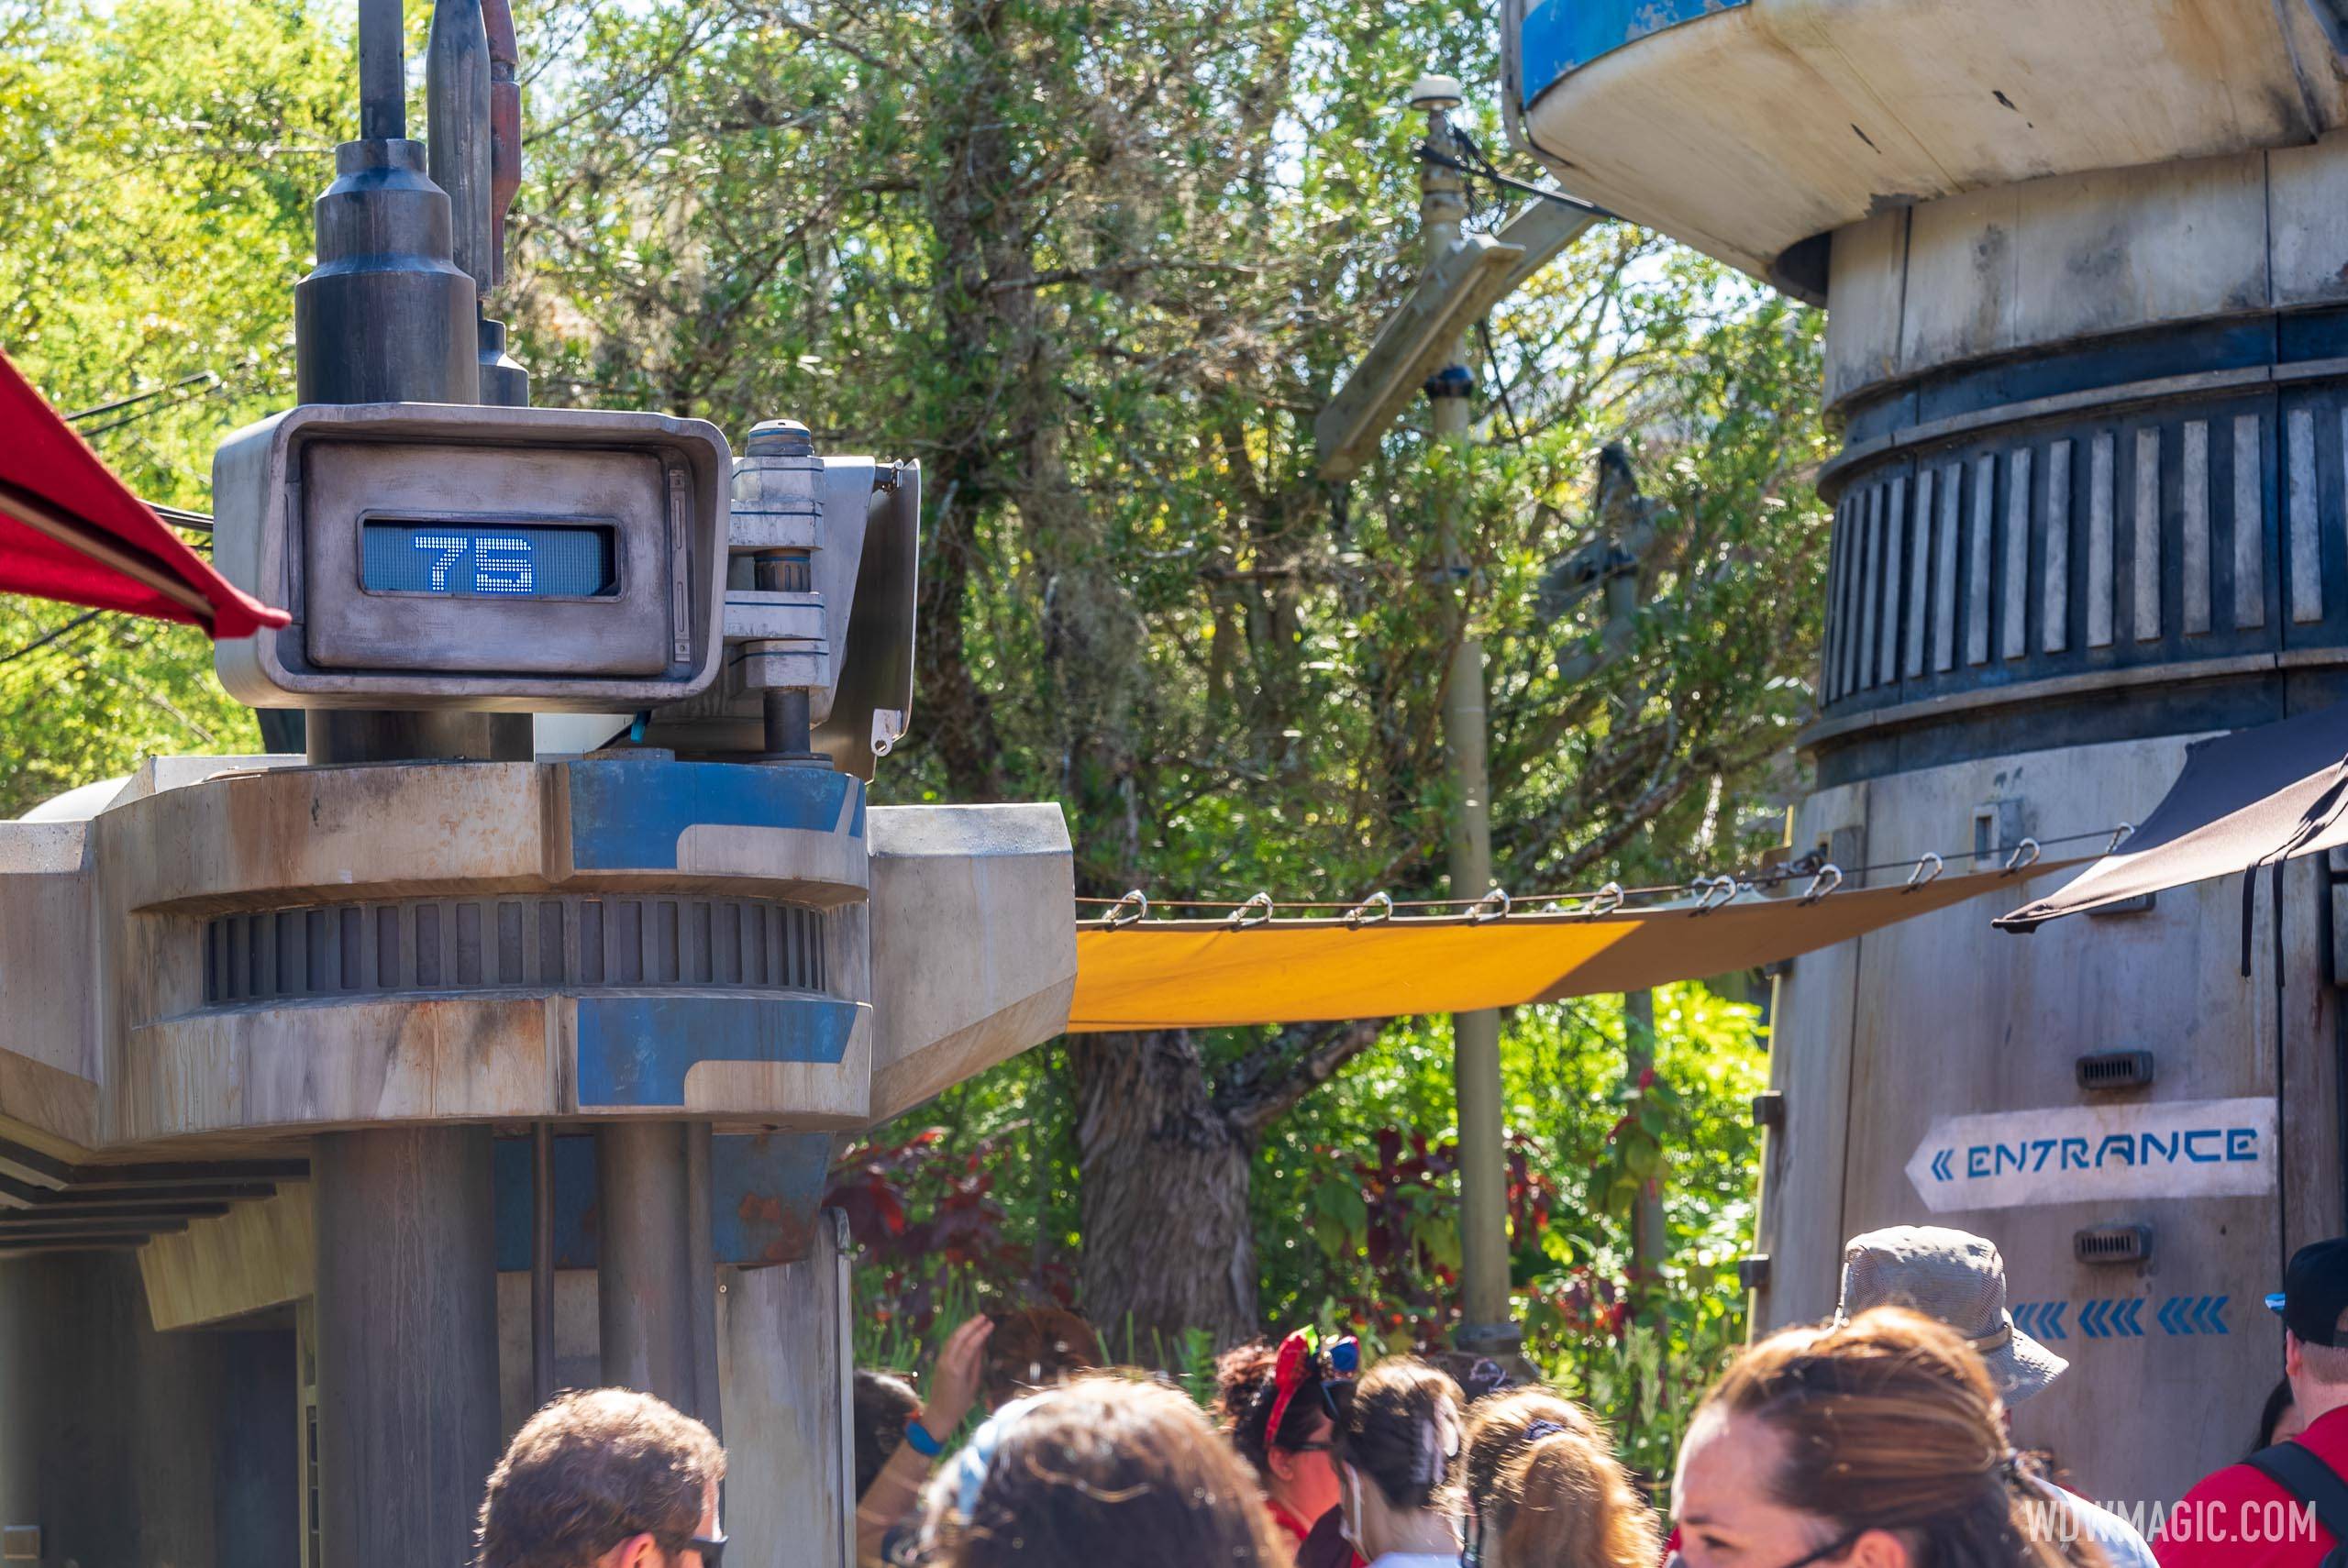 Star Wars Rise of the Resistance first day of standby queue operation